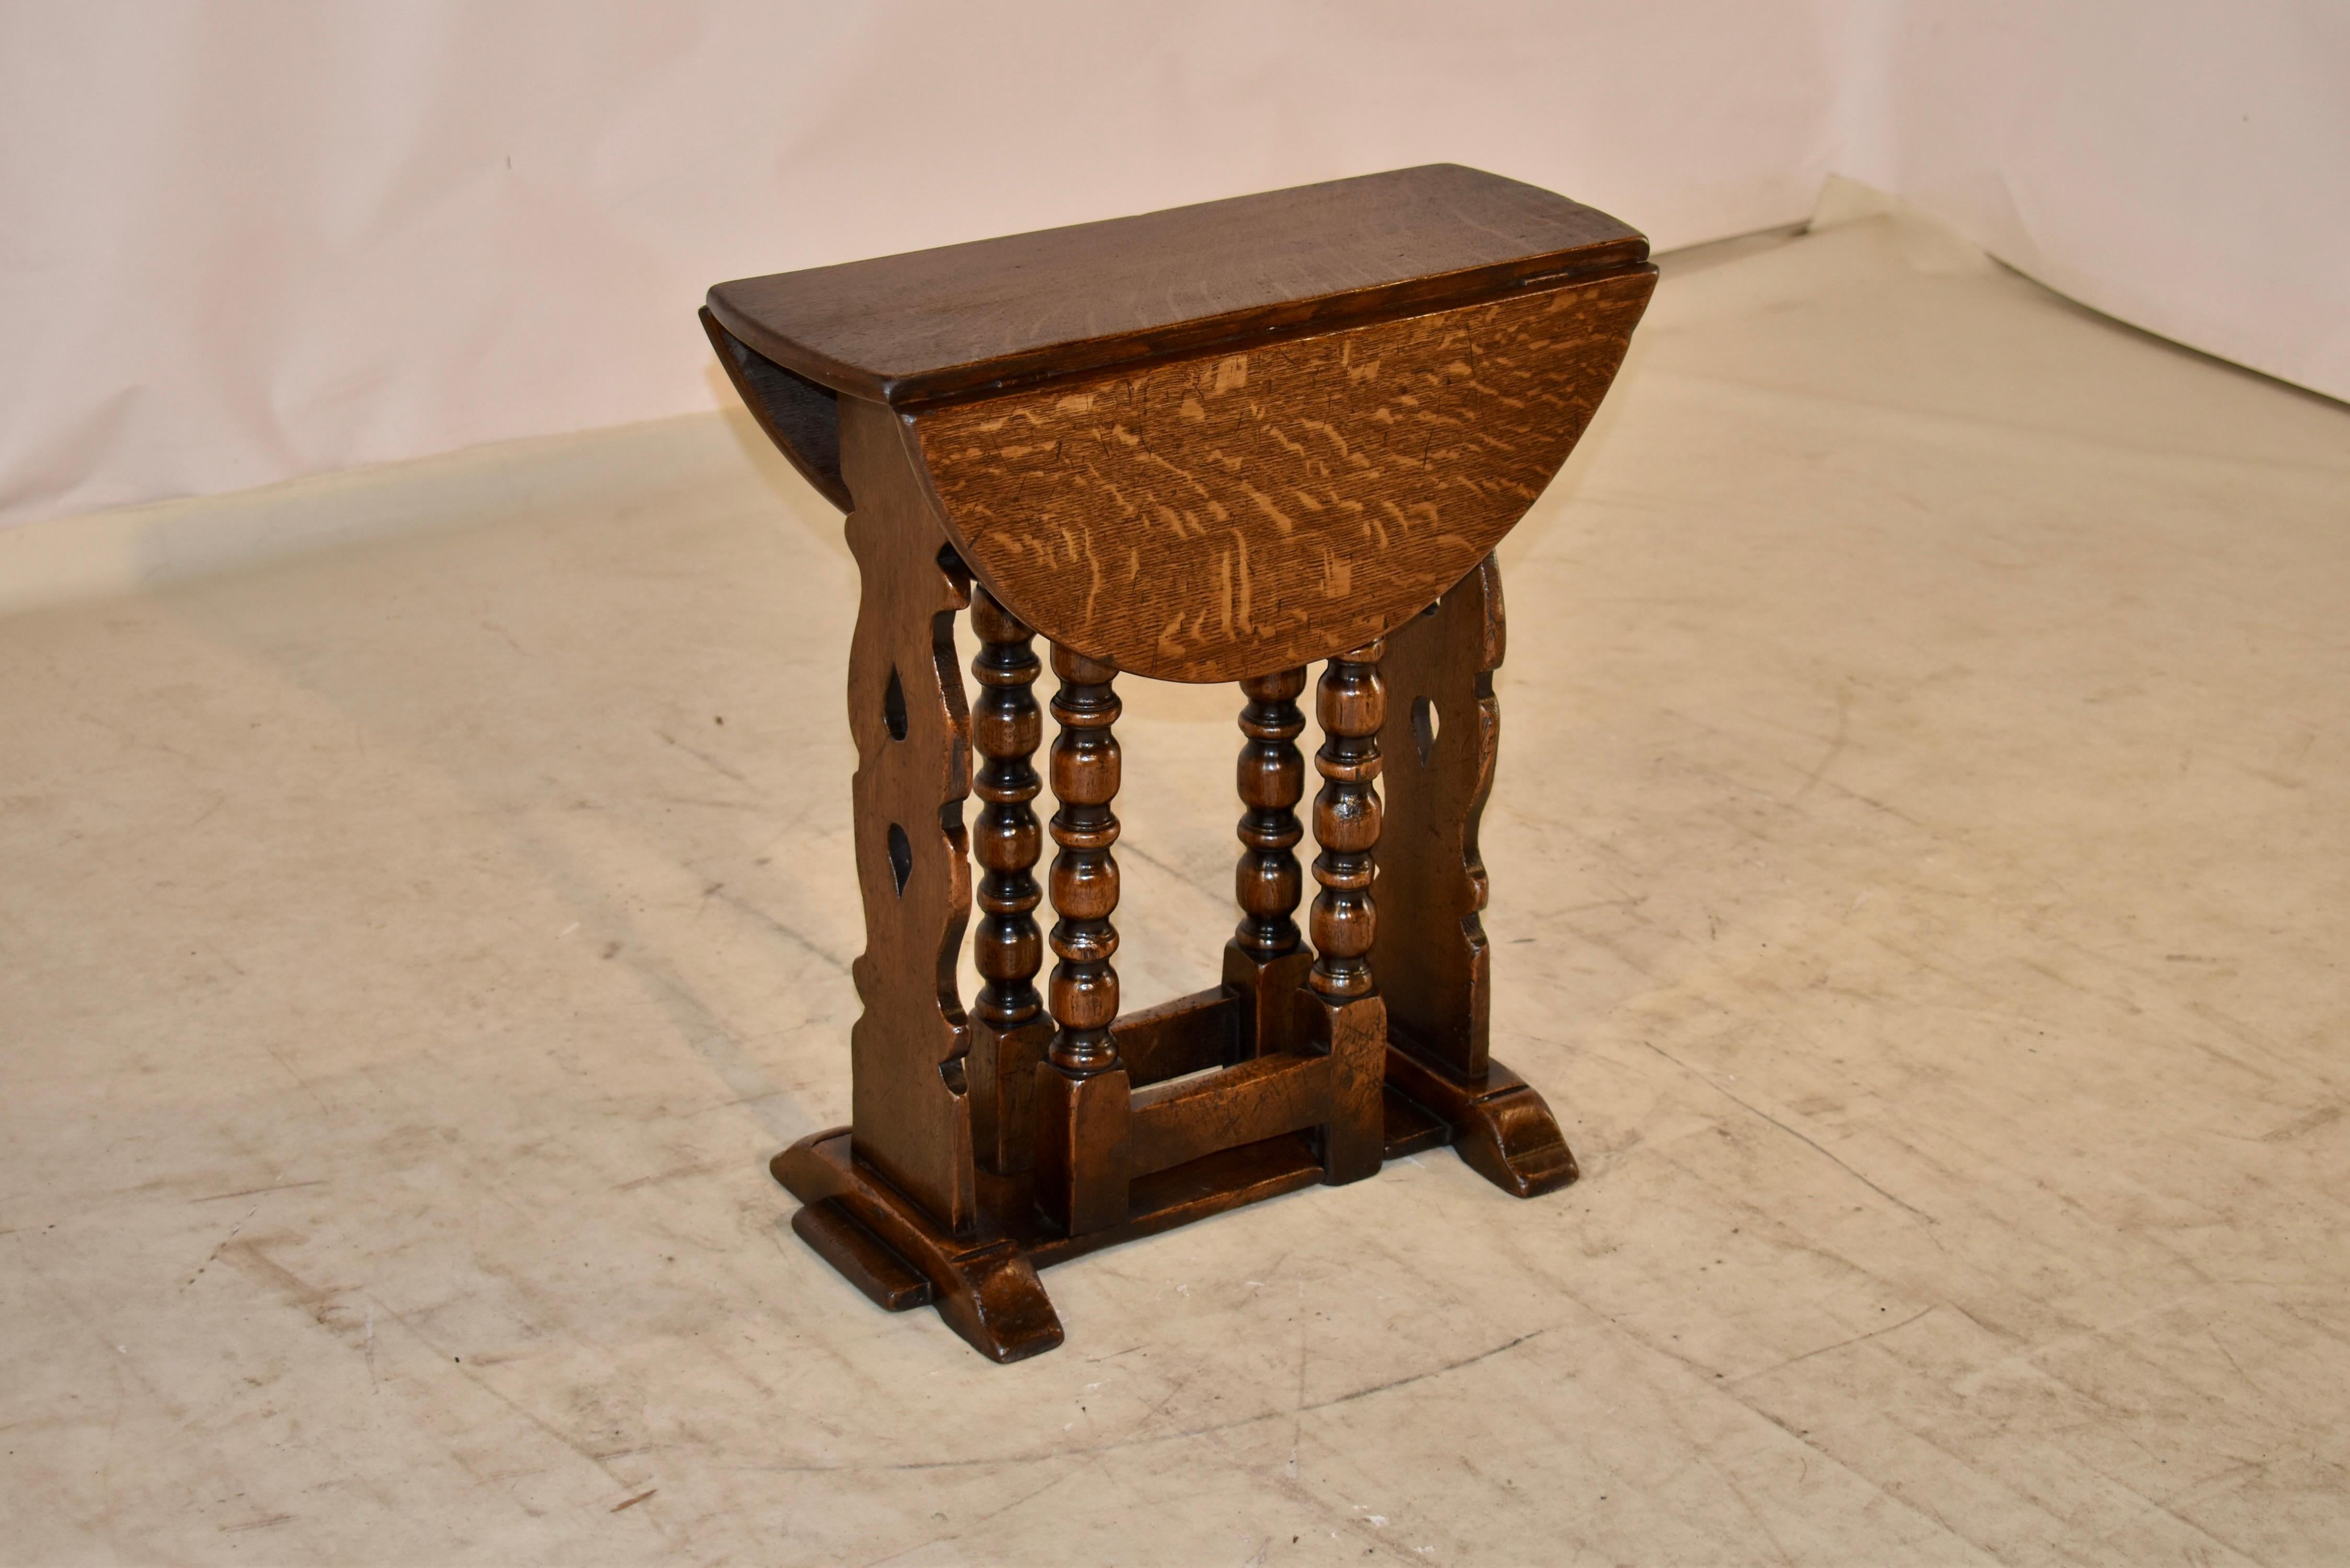 19th century oak gate leg table from England. The top is wonderfully grained and follows down to a pierced trestle base with lovely hand turned bob and stop style legs, which swing out to support the leaves when extended. The top open measures 24.63